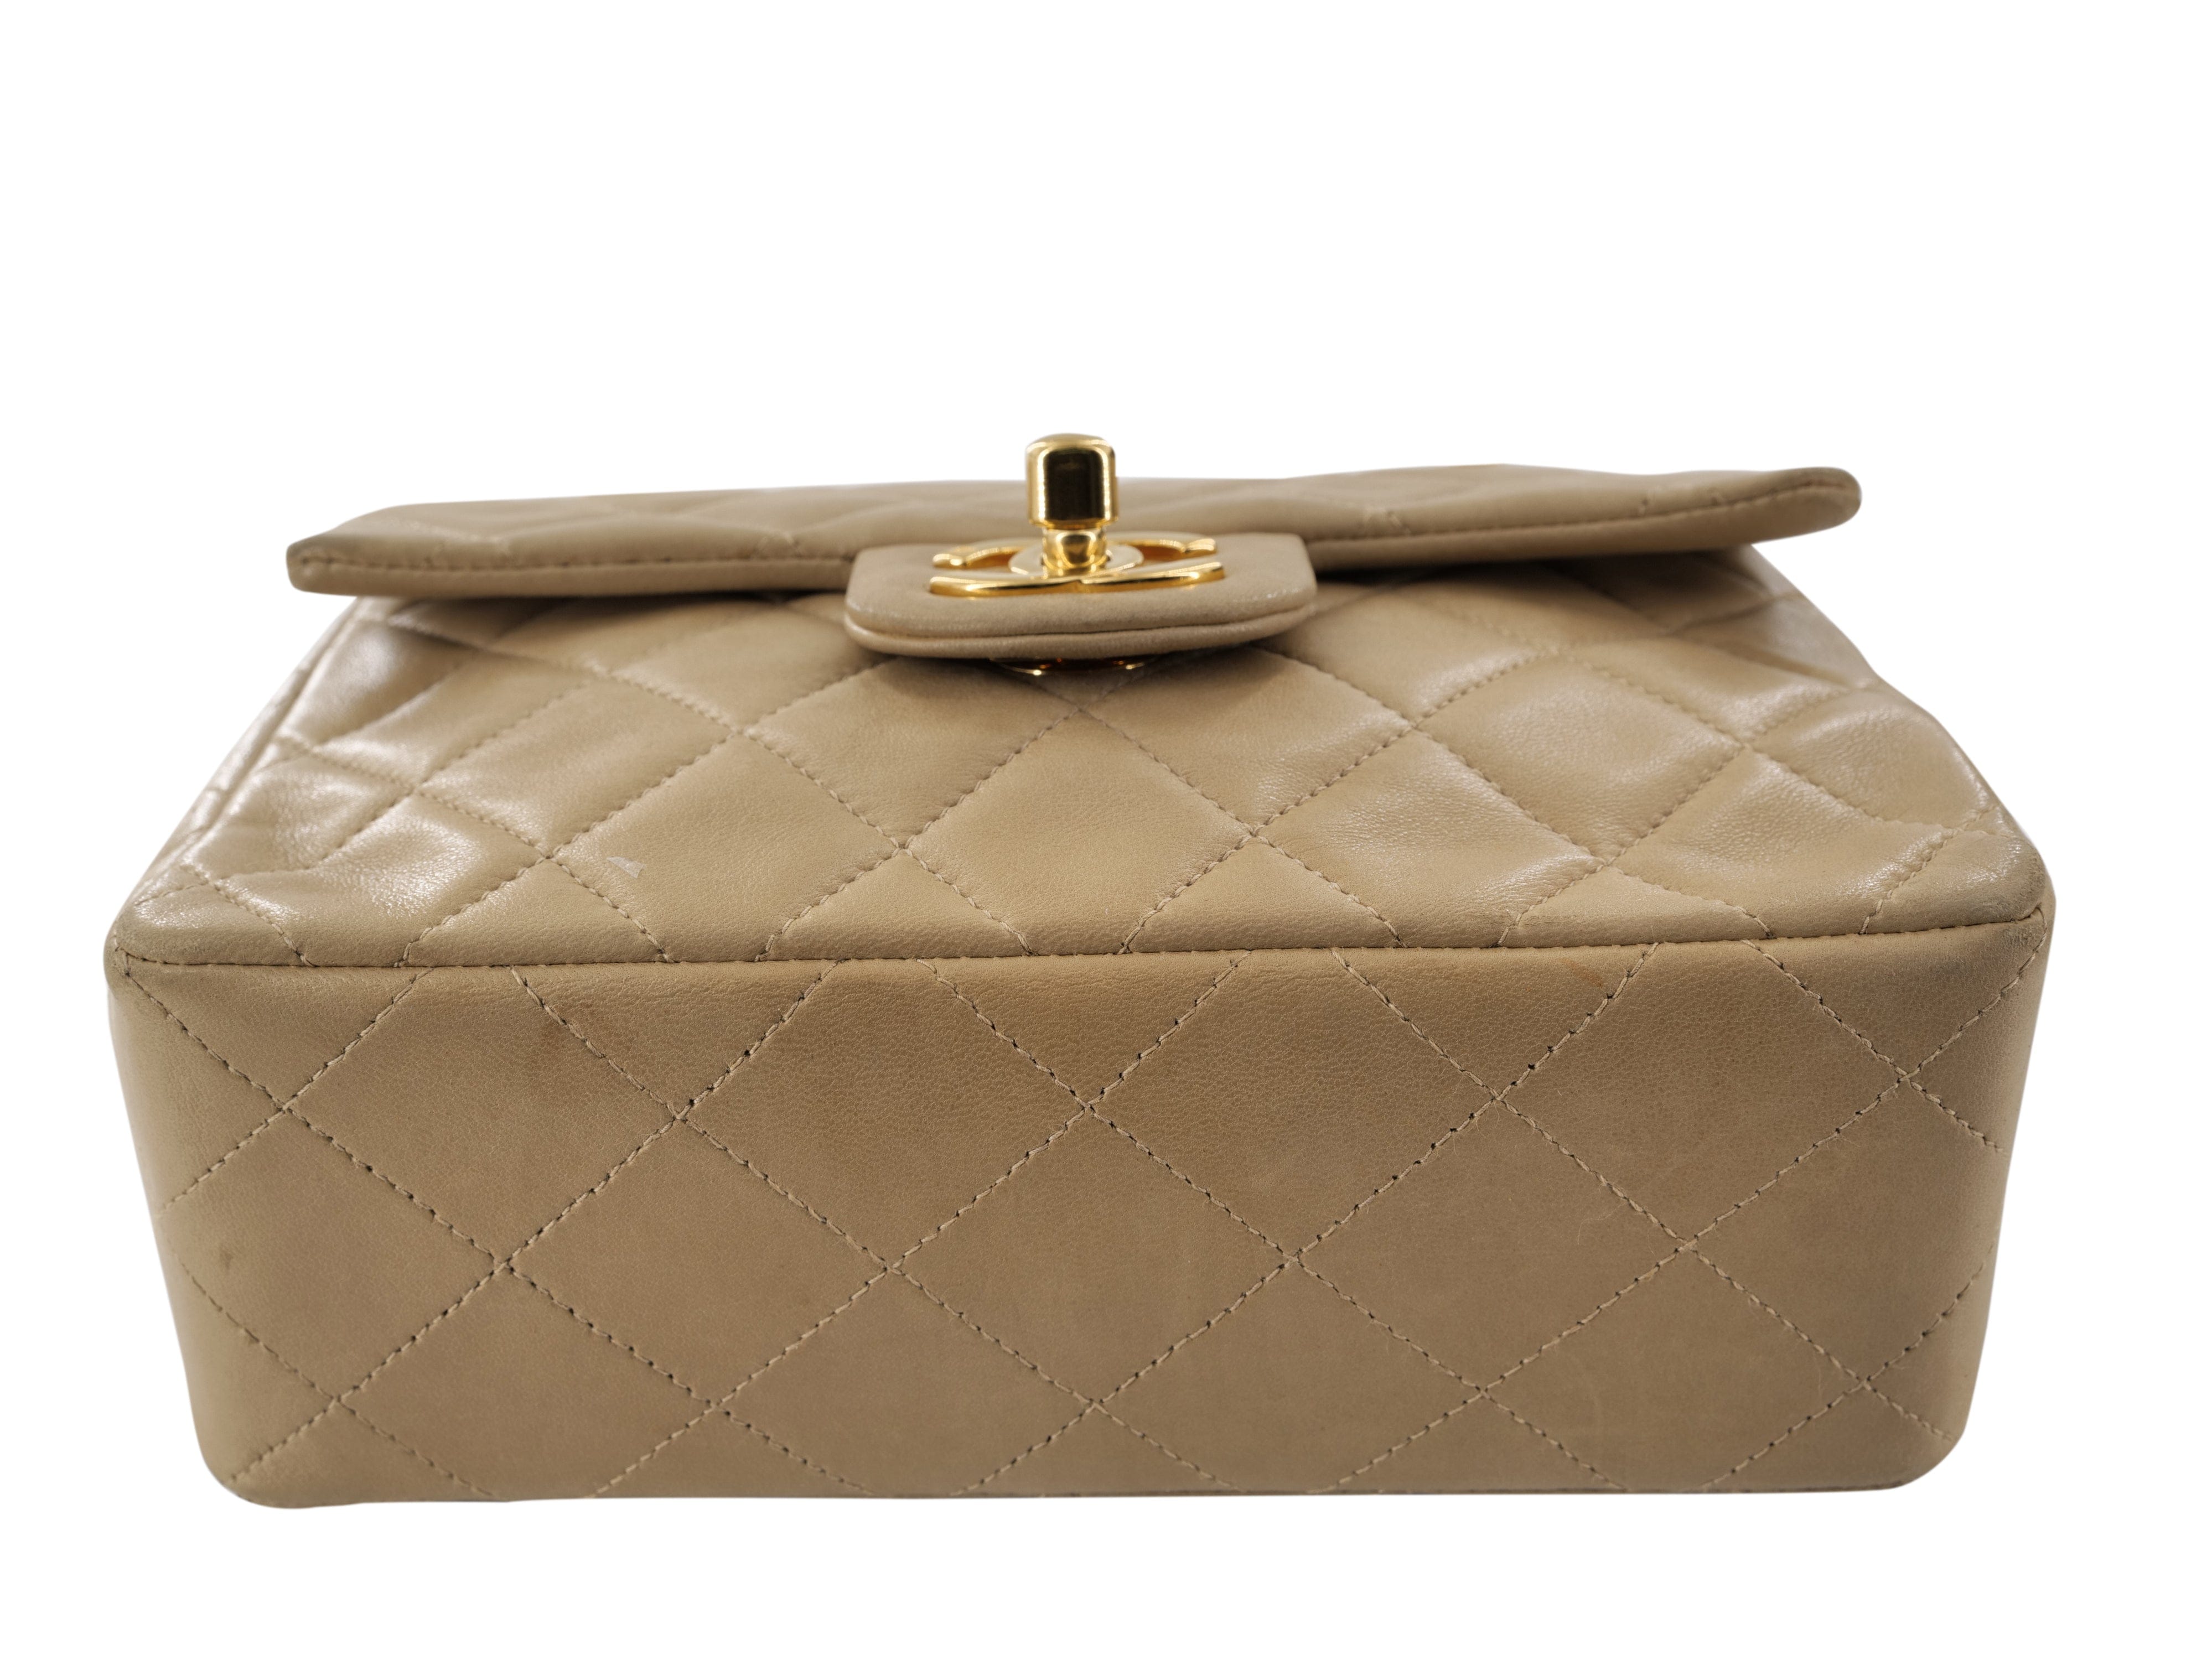 Chanel Chanel Vintage Beige 7" Mini Classic Flap Bag with GHW - AWC1248